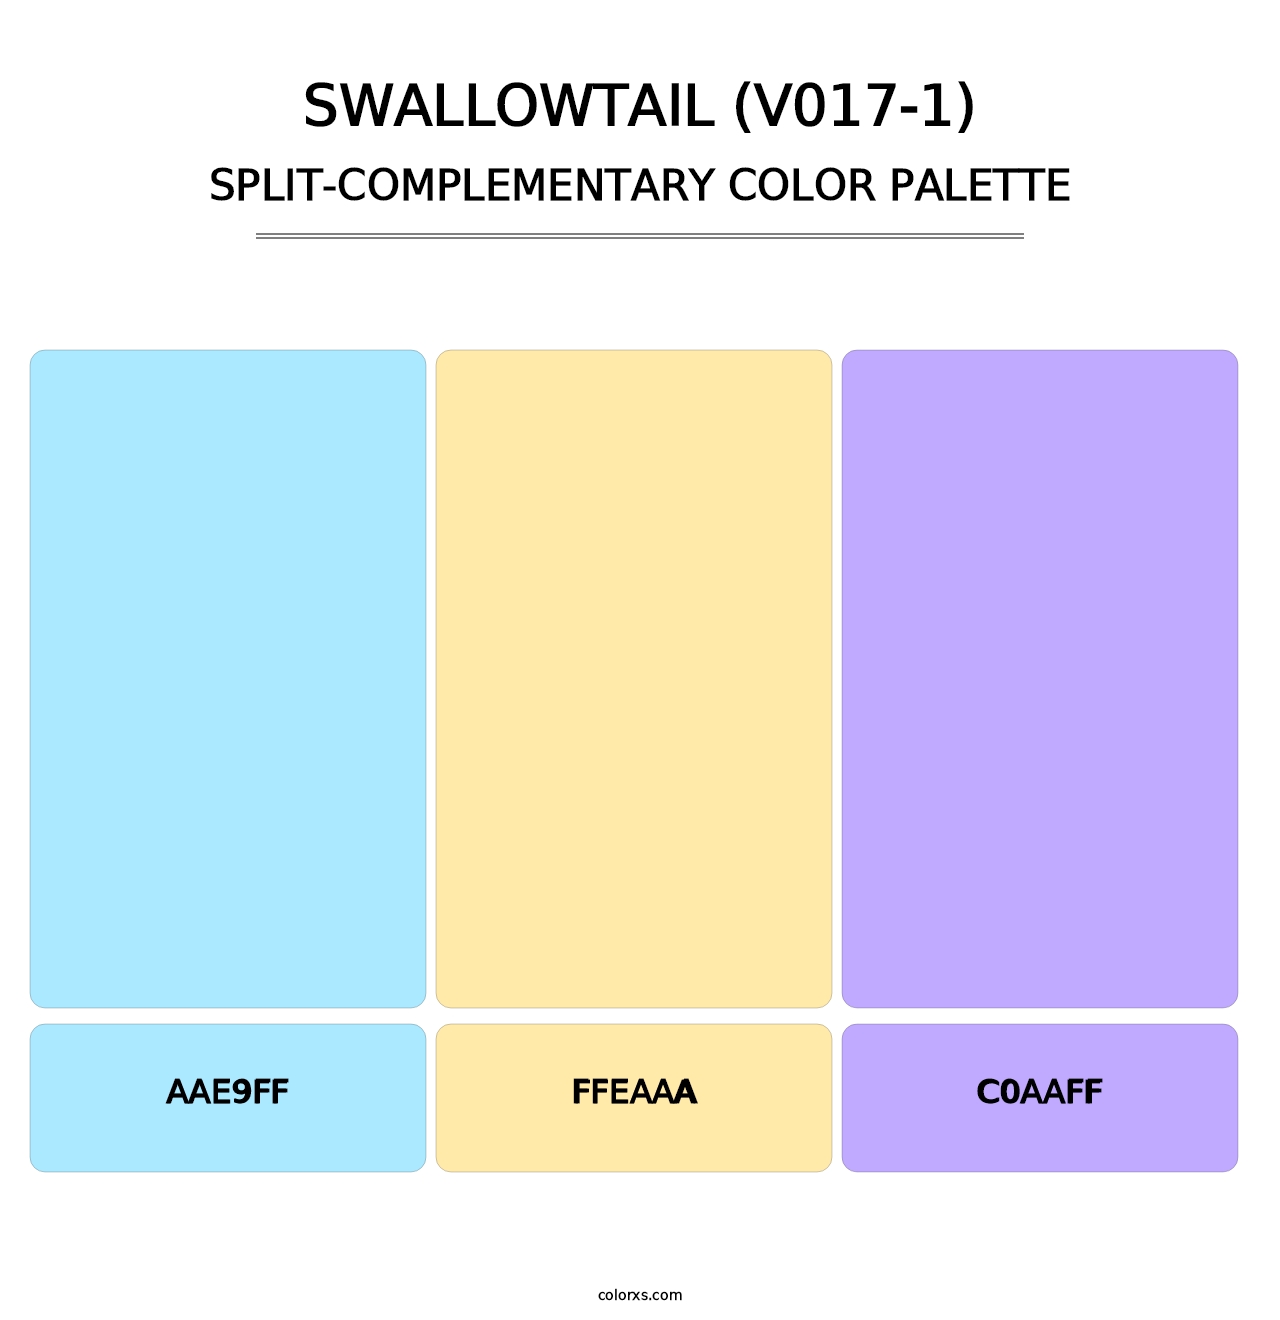 Swallowtail (V017-1) - Split-Complementary Color Palette